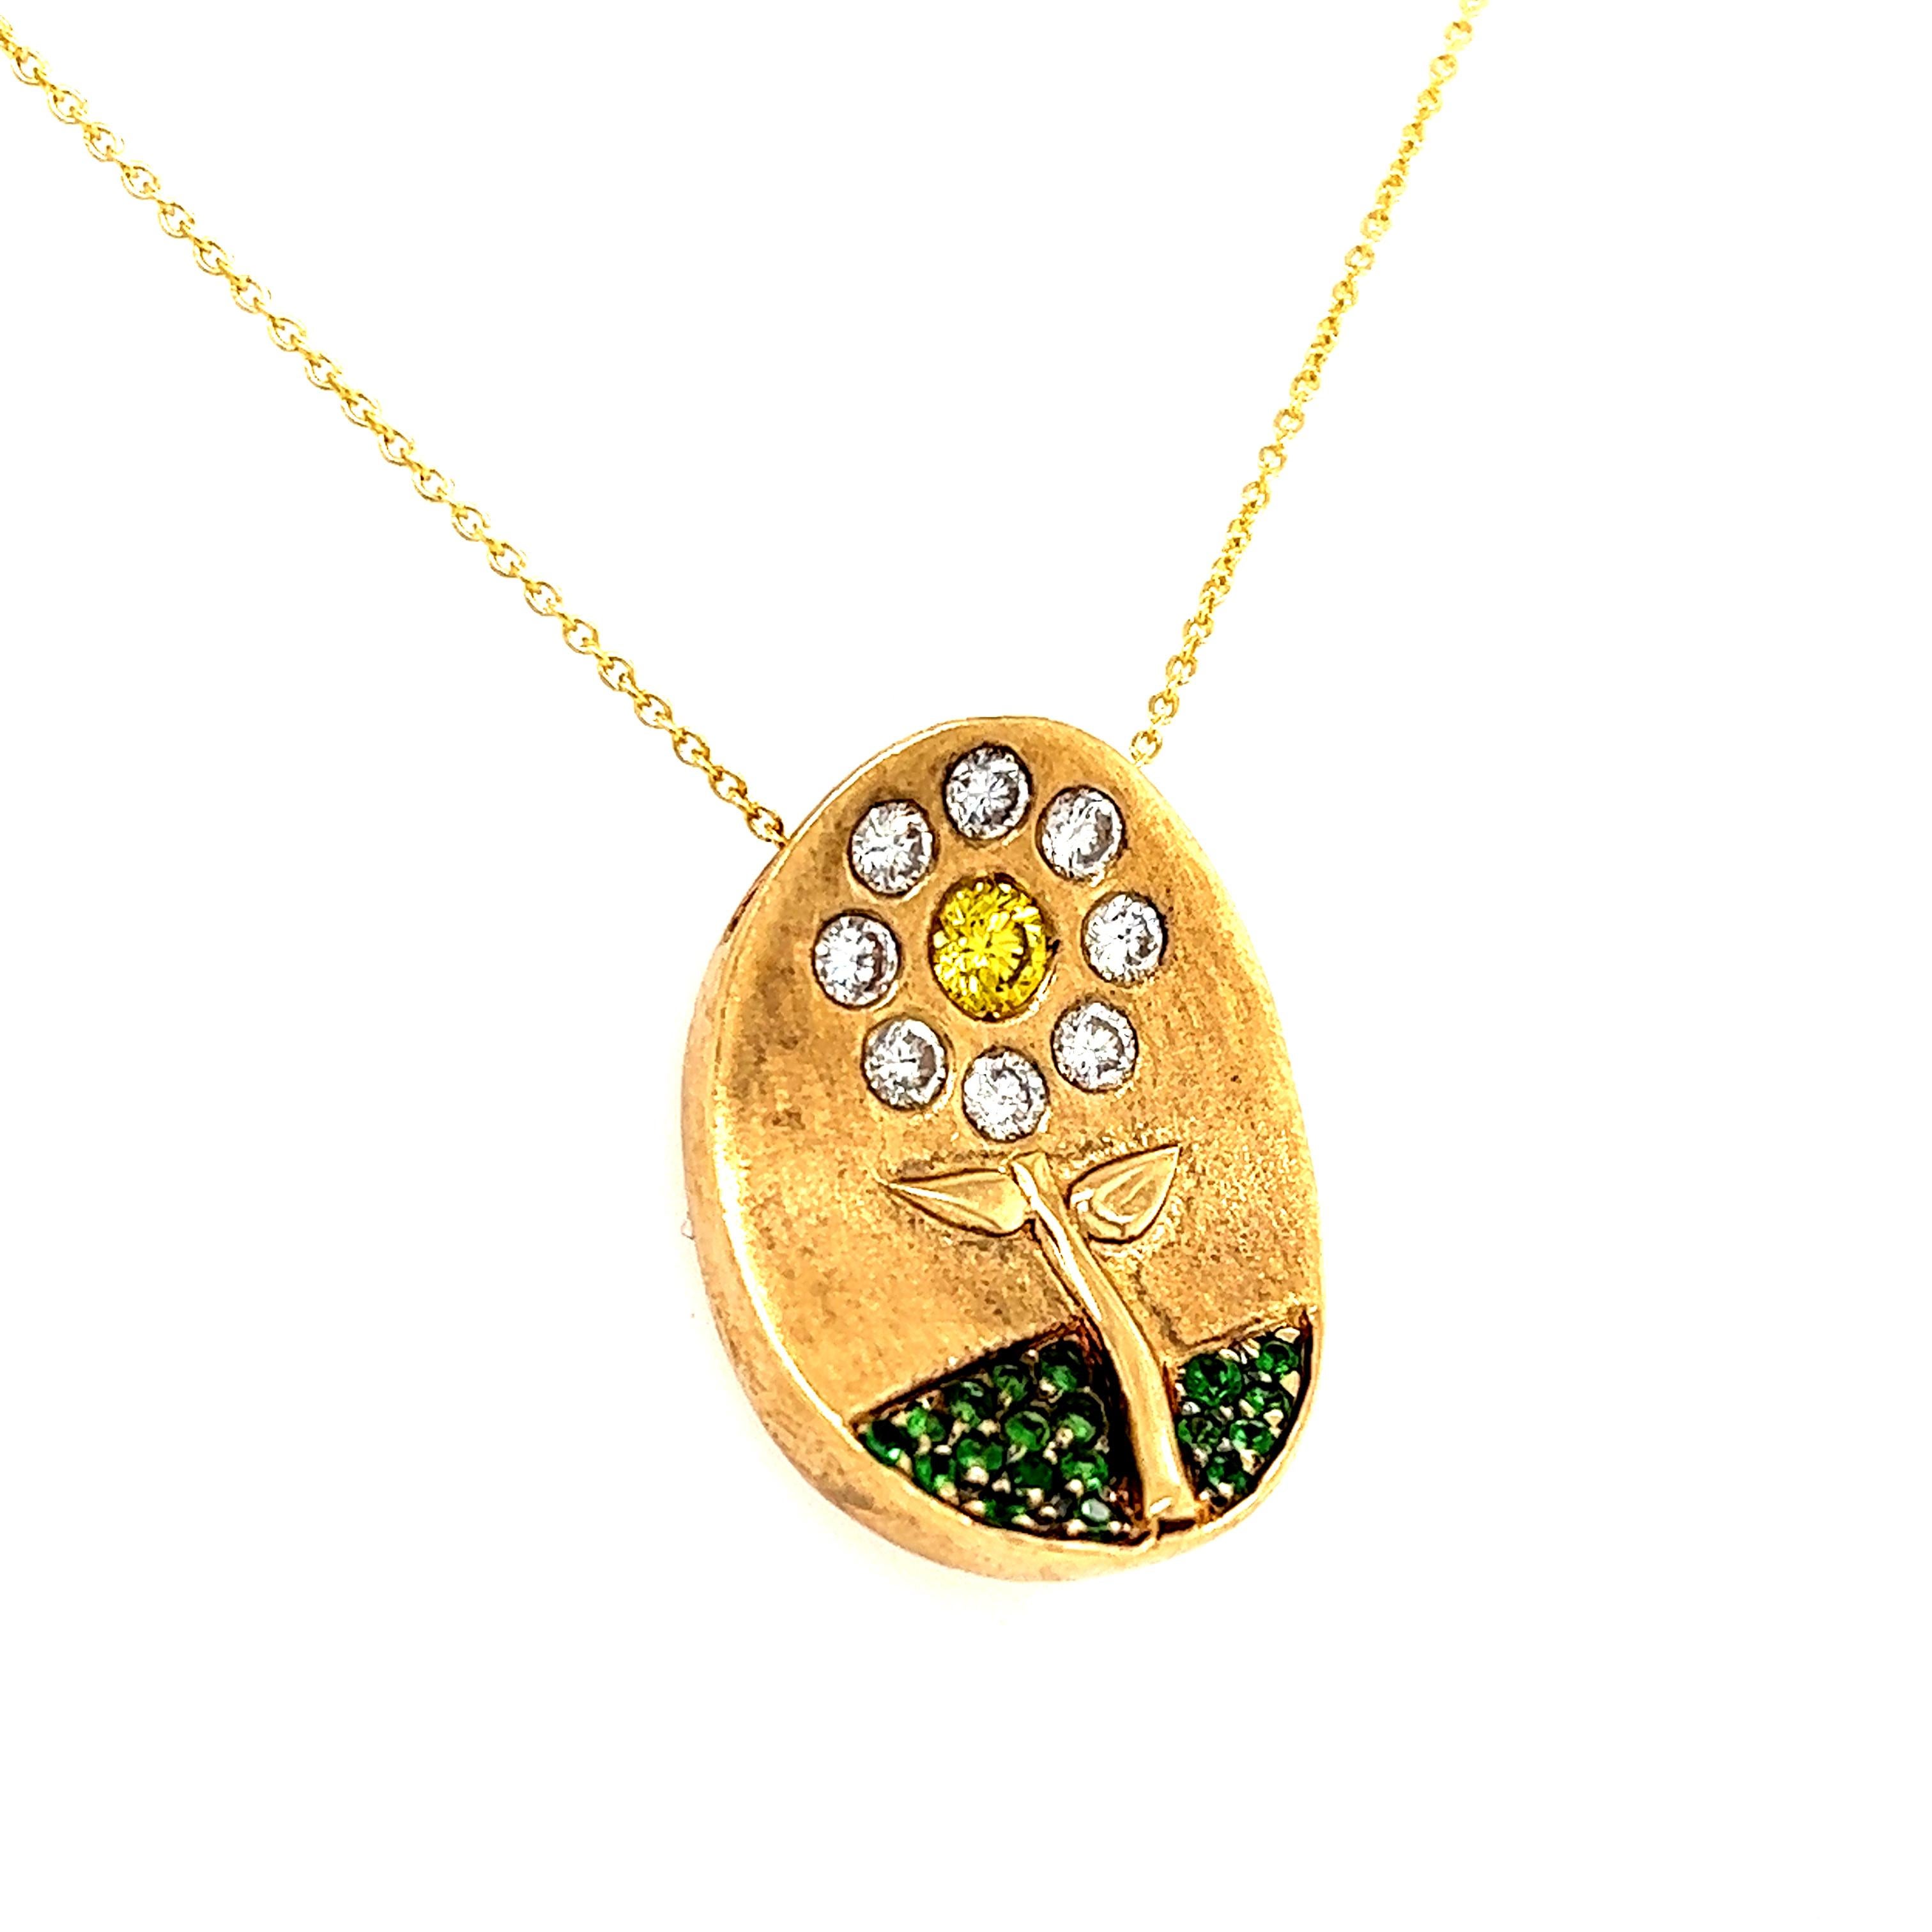 Beautiful hand crafted slider pendant crafted in 18k yellow gold. The pendant shows a unique curved shape and is highlighted with one magnificent round fancy vivid yellow colored diamond. The center stone weighs approximately 0.25 ct. and add's a